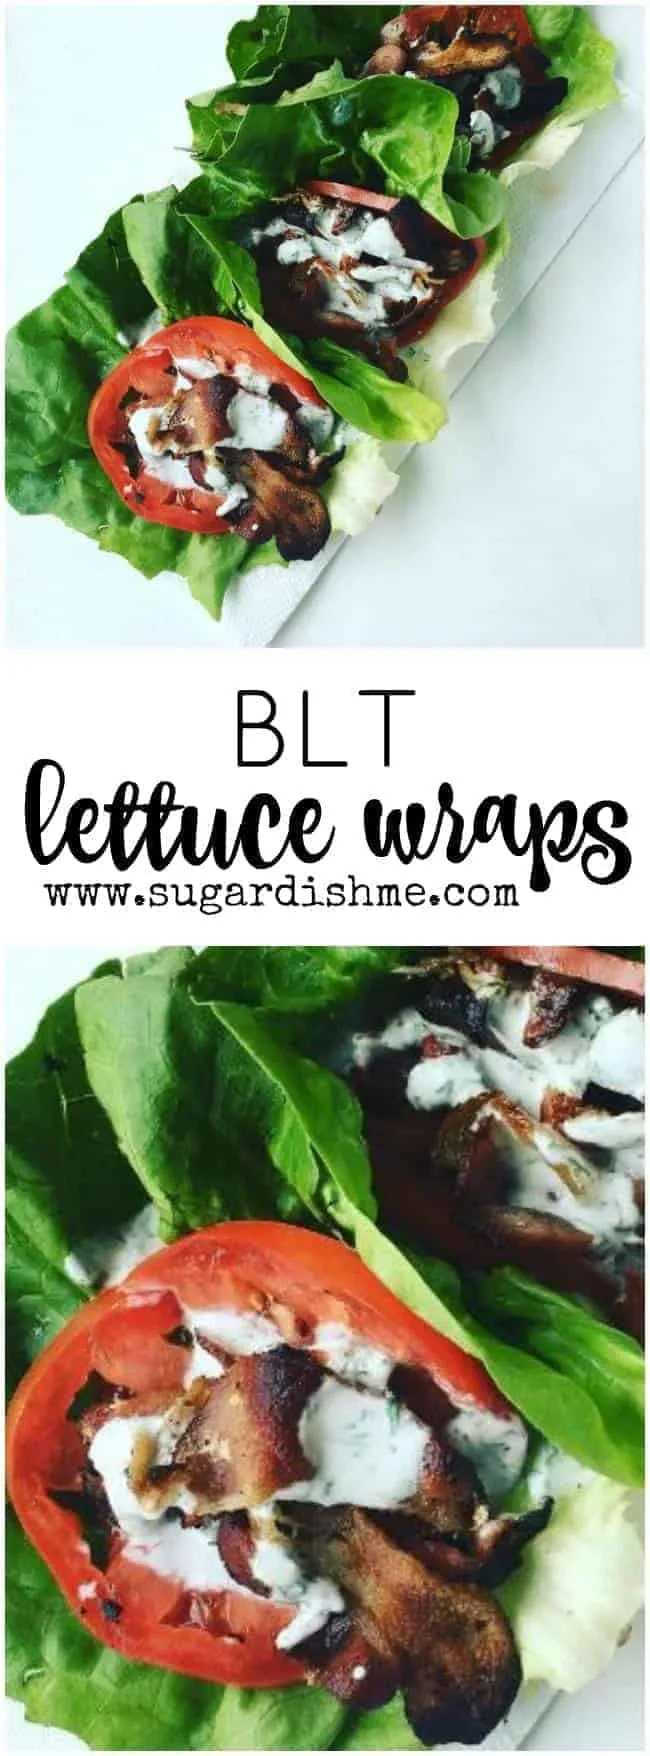 These BLT Lettuce Wraps are ready to eat in 15 mins. All you have to do is cook the bacon! Simple, low carb, delicious.